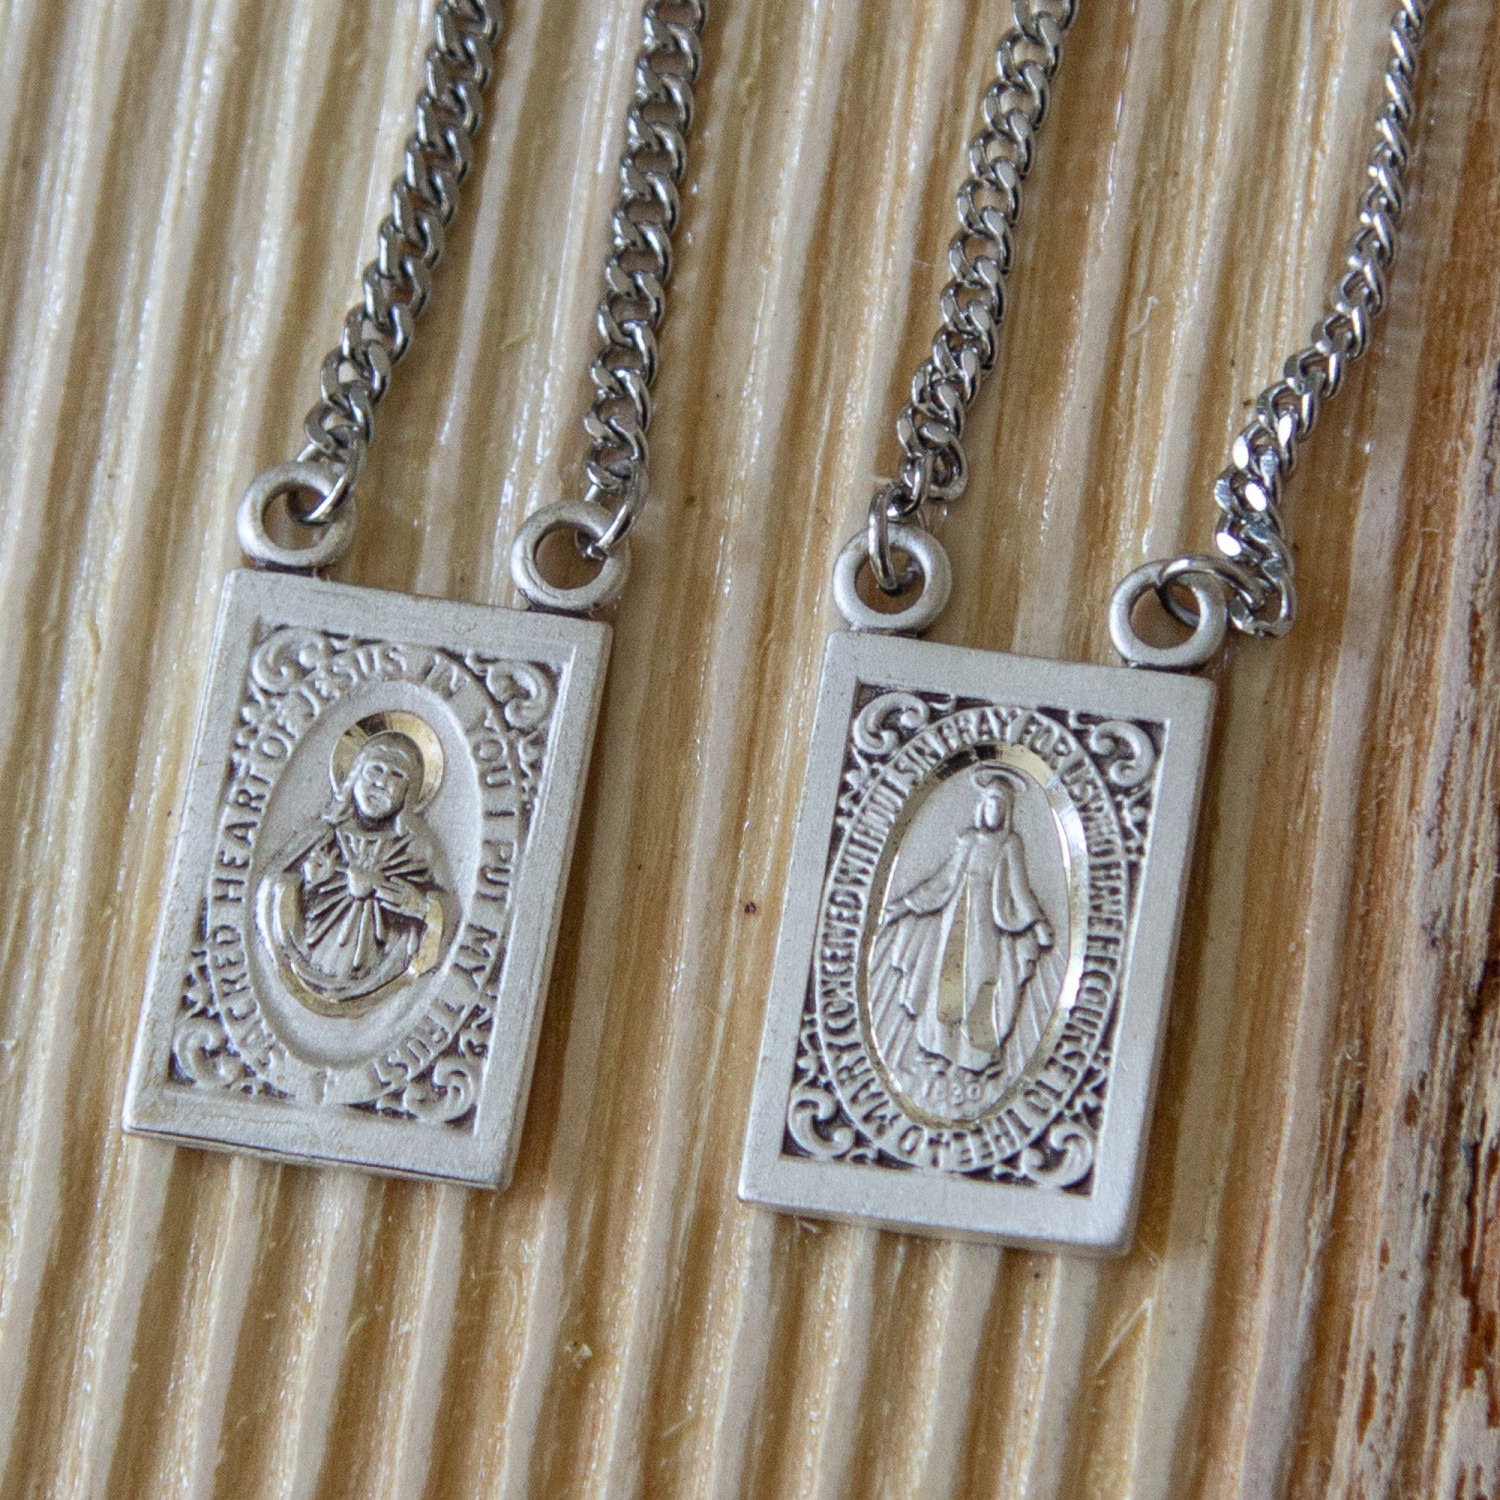 Four Way Cross Scapular Medal | Small Devotions – Small Devotions